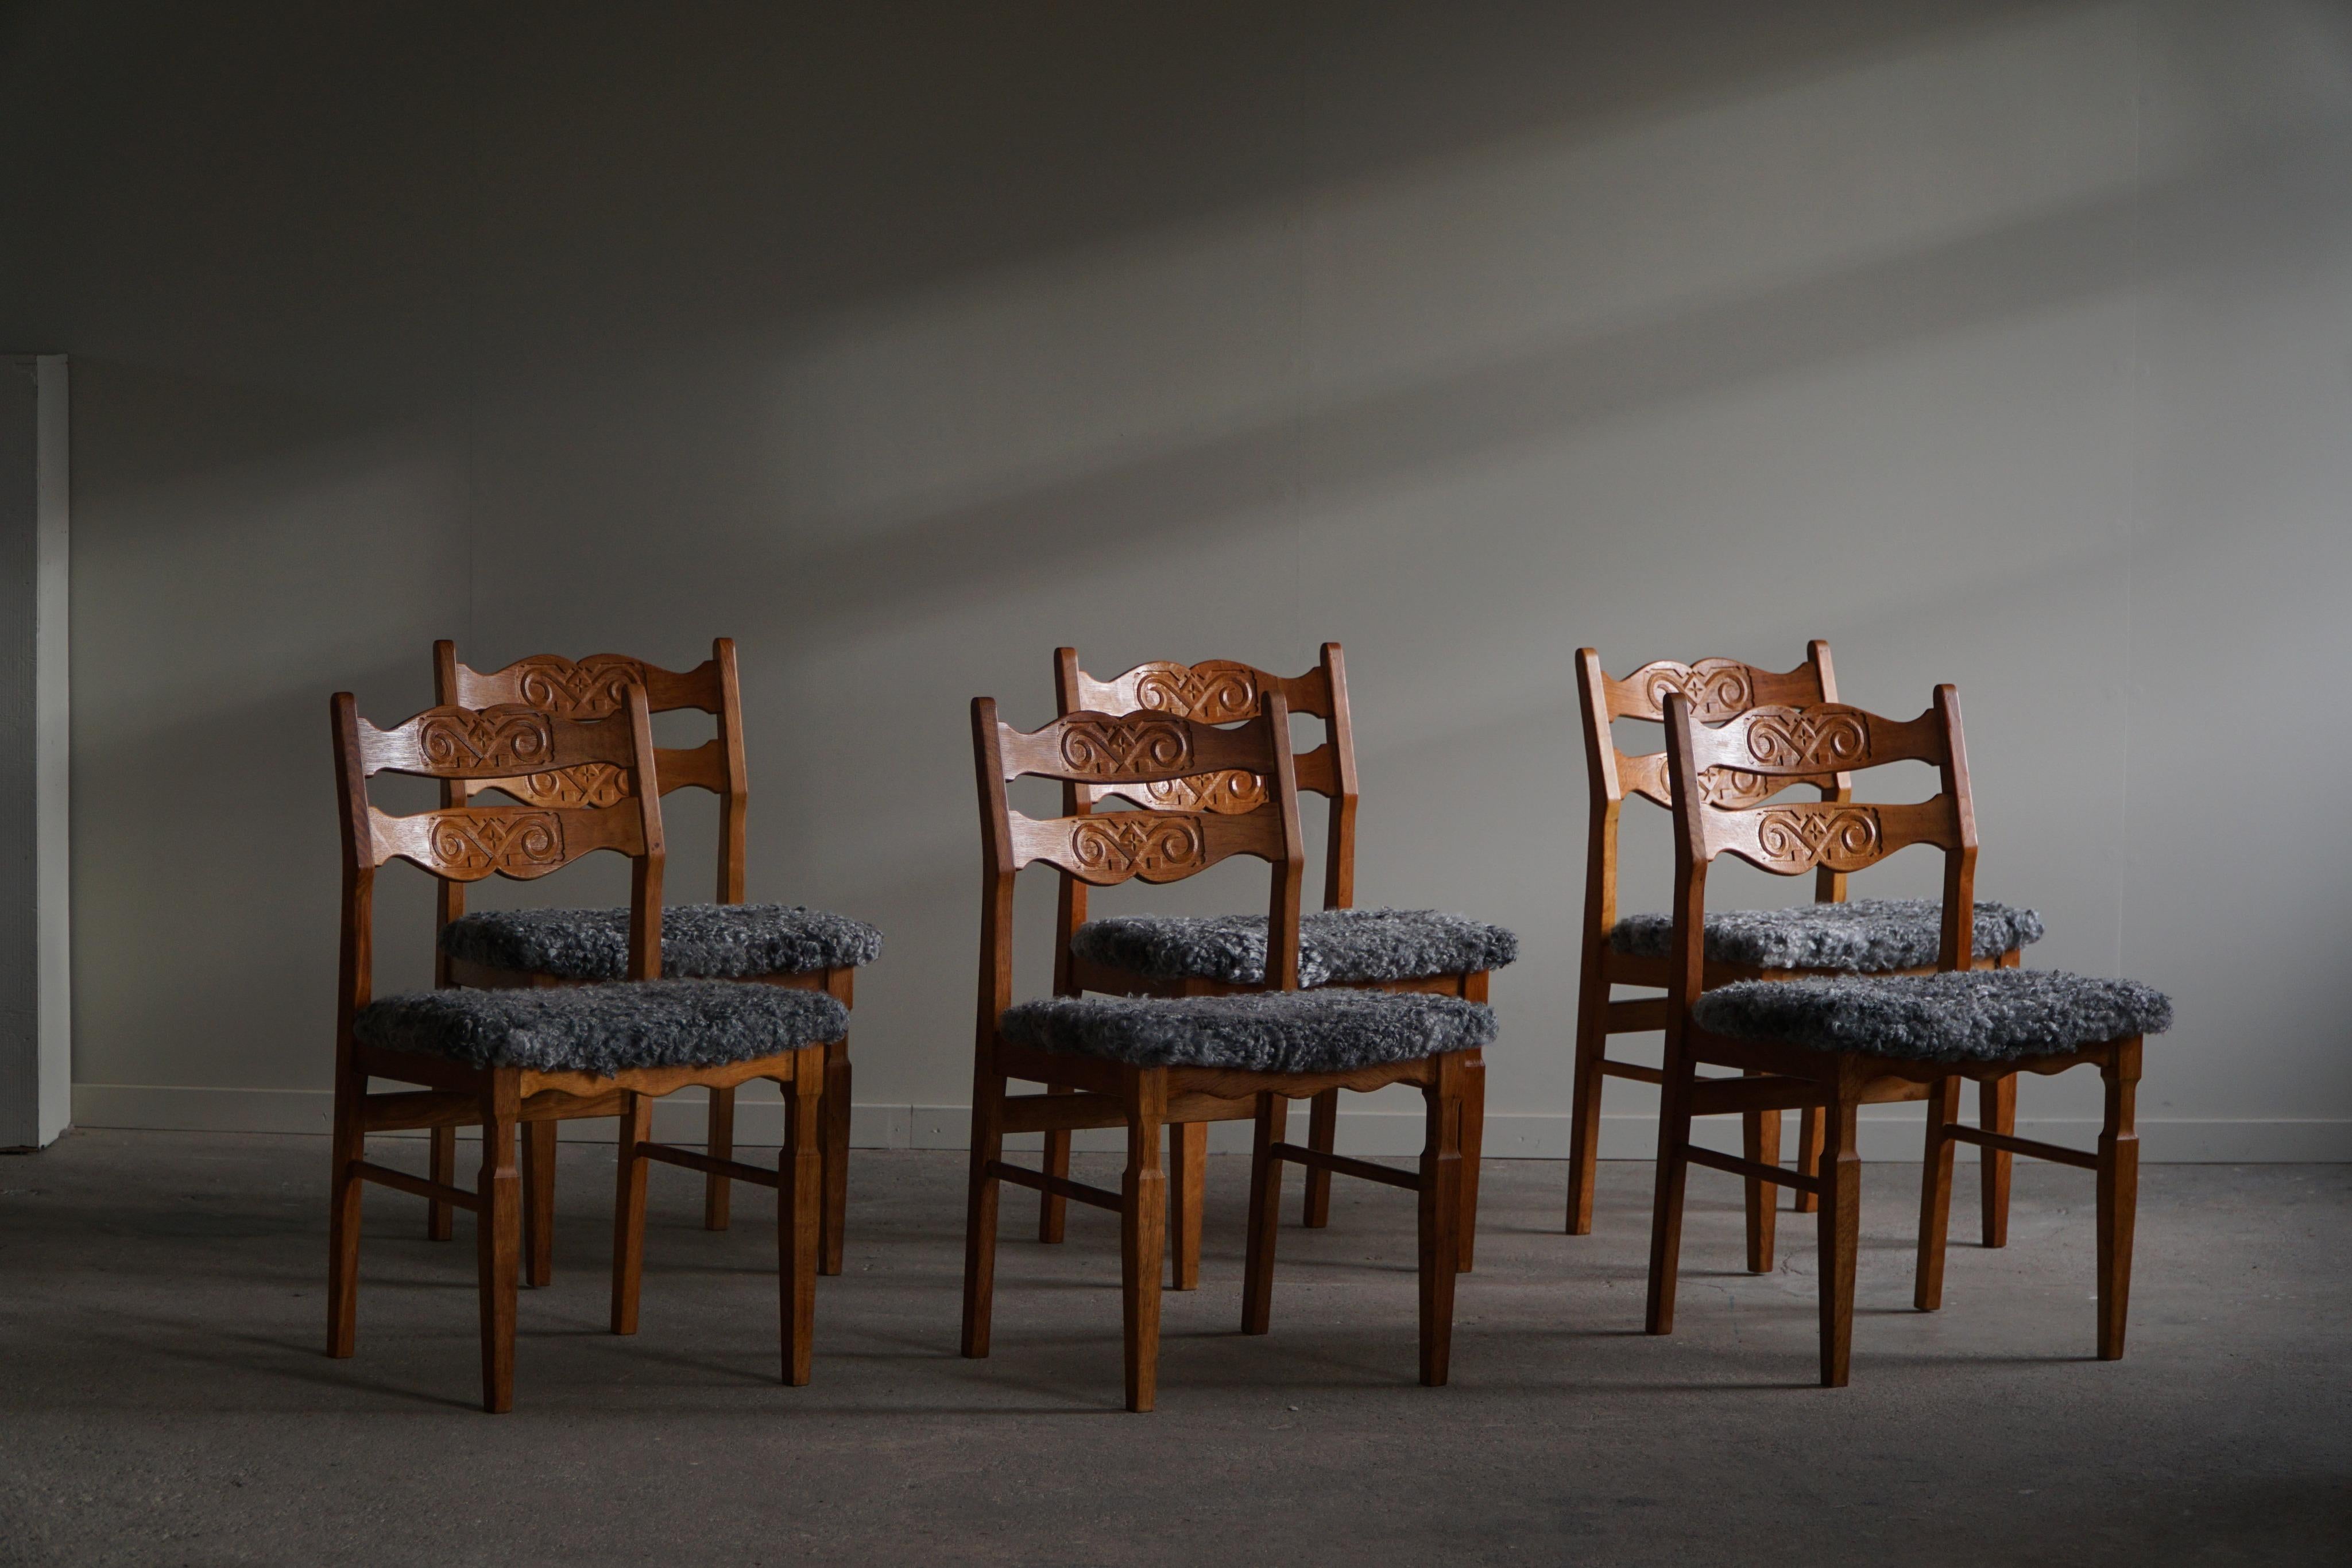 A refined classic set of 6 dining chairs in solid oak, seats reupholstered in Gotland Sheepskin, a silky touch and gorgeous shining gray color. Strong references to the popular 